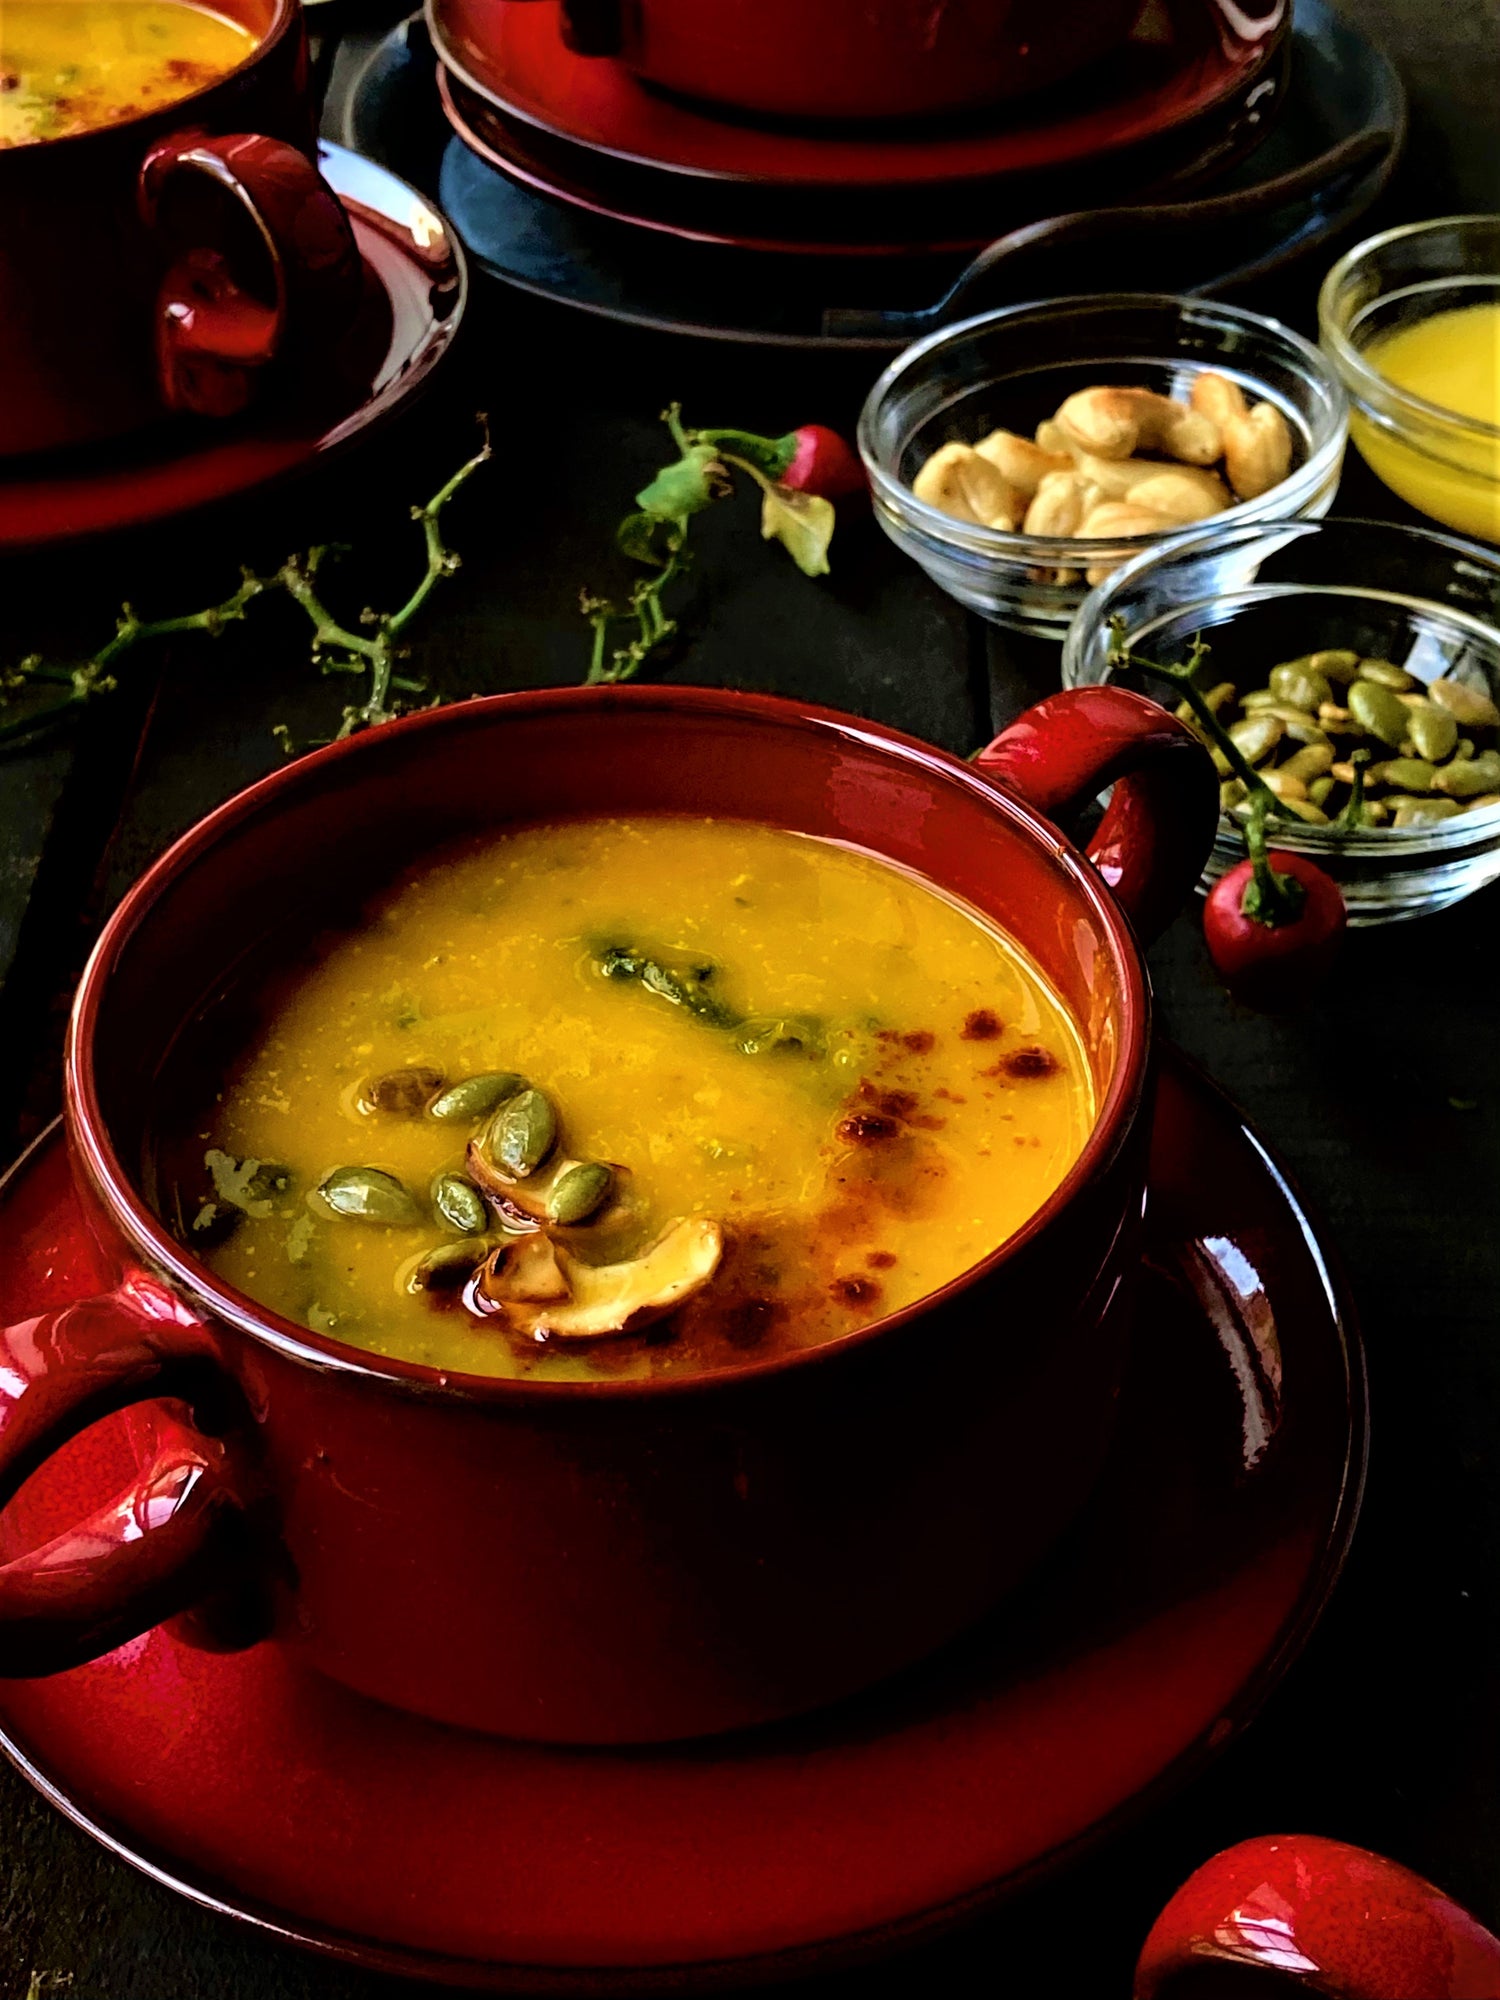 Comforting, Restorative, Spiced and Hearty - Your Perfect Winter Soup Recipe!